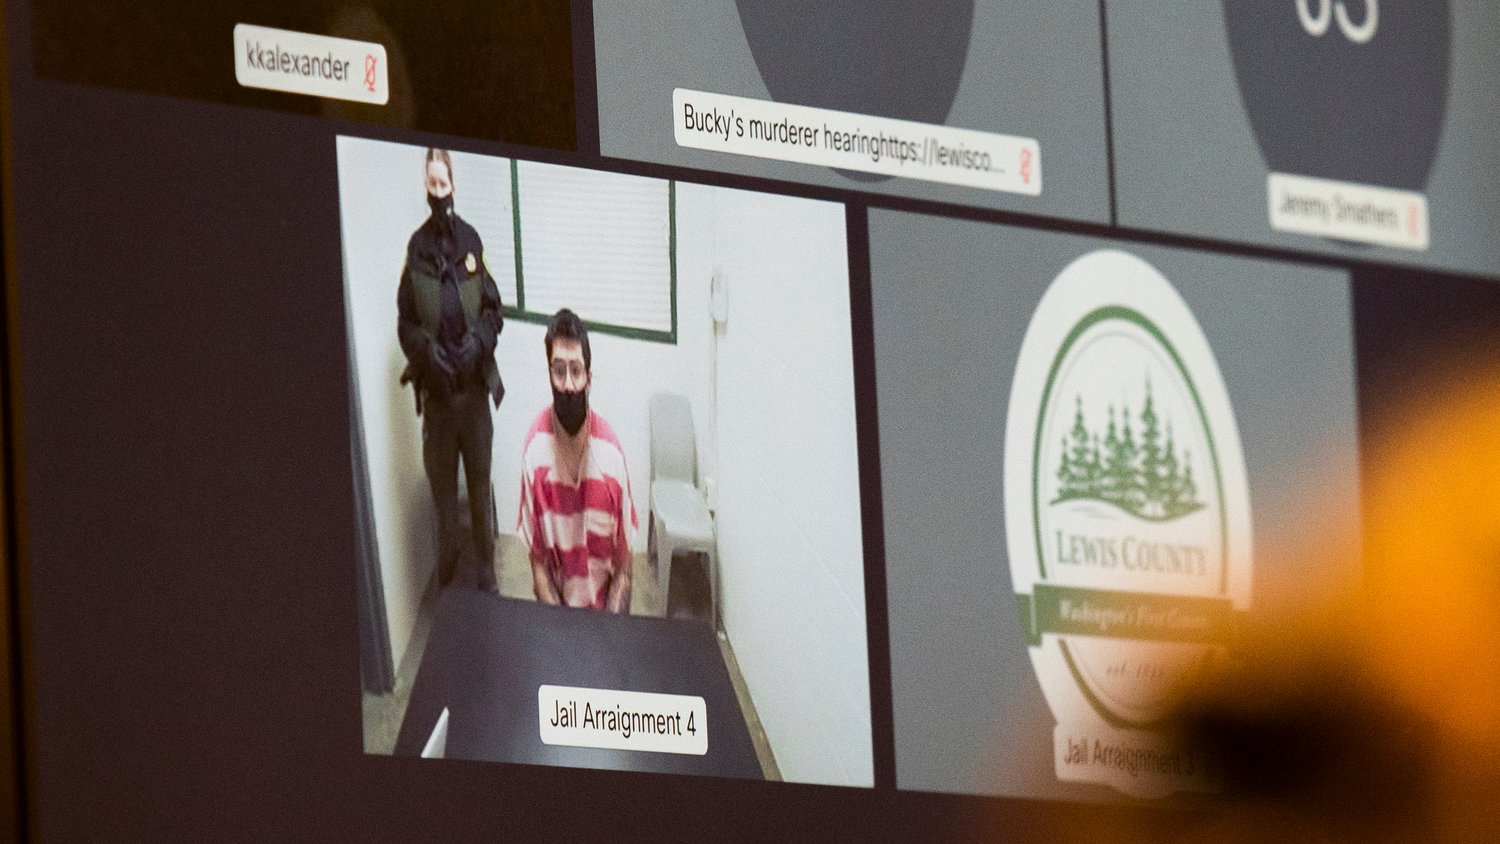 Billy James Bartlett, 30, appears in Lewis County Superior Court via Webex Thursday in Chehalis.